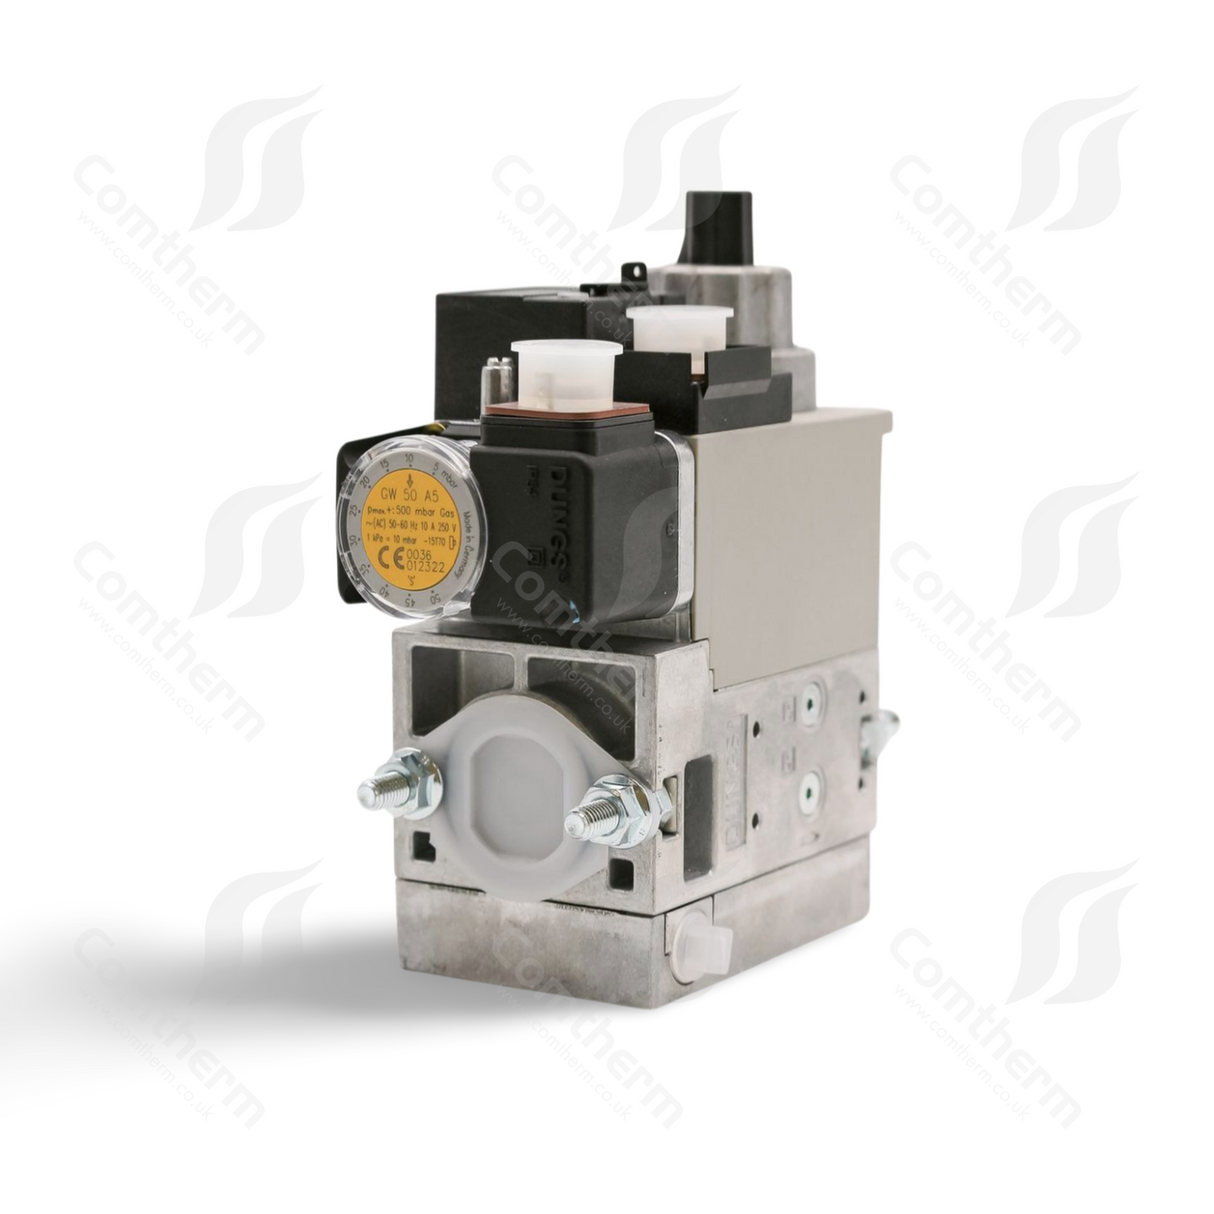 Dungs MB-DLE 407 B01 S50 + GW150A5 Multibloc Gas Valve - 230v